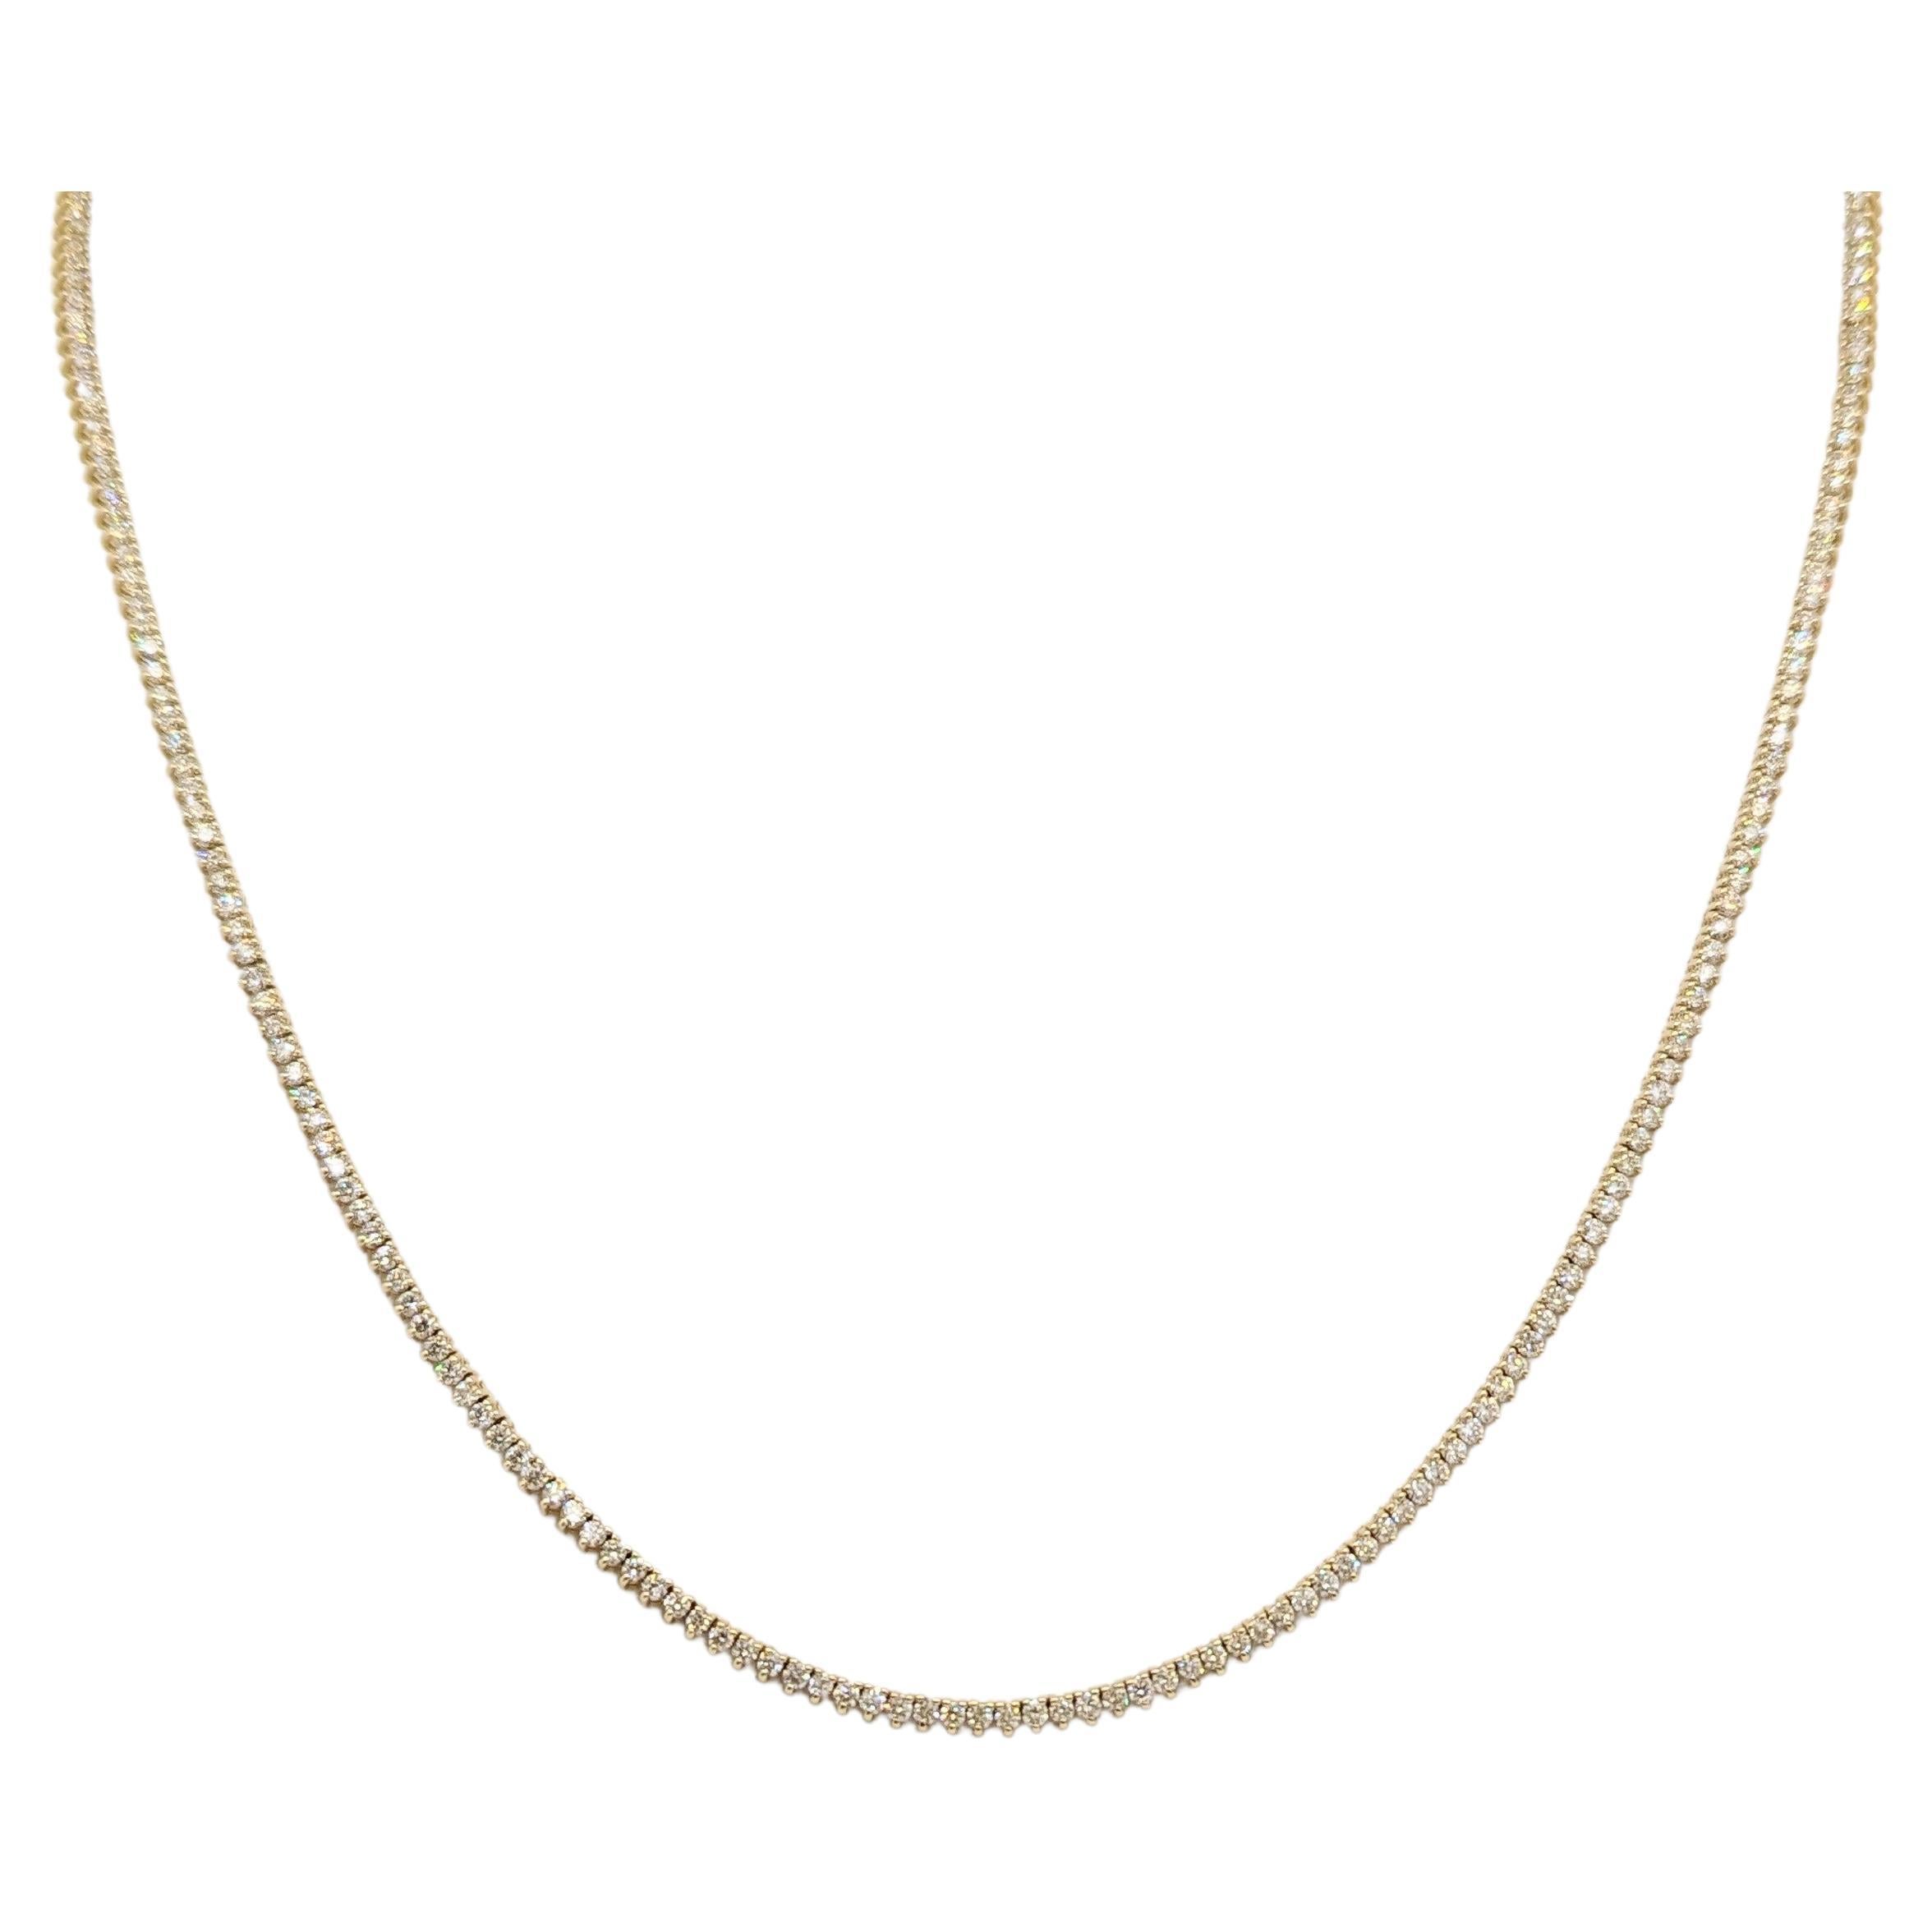 White Diamond Round 3 Prong Tennis Necklace in 14K Yellow Gold